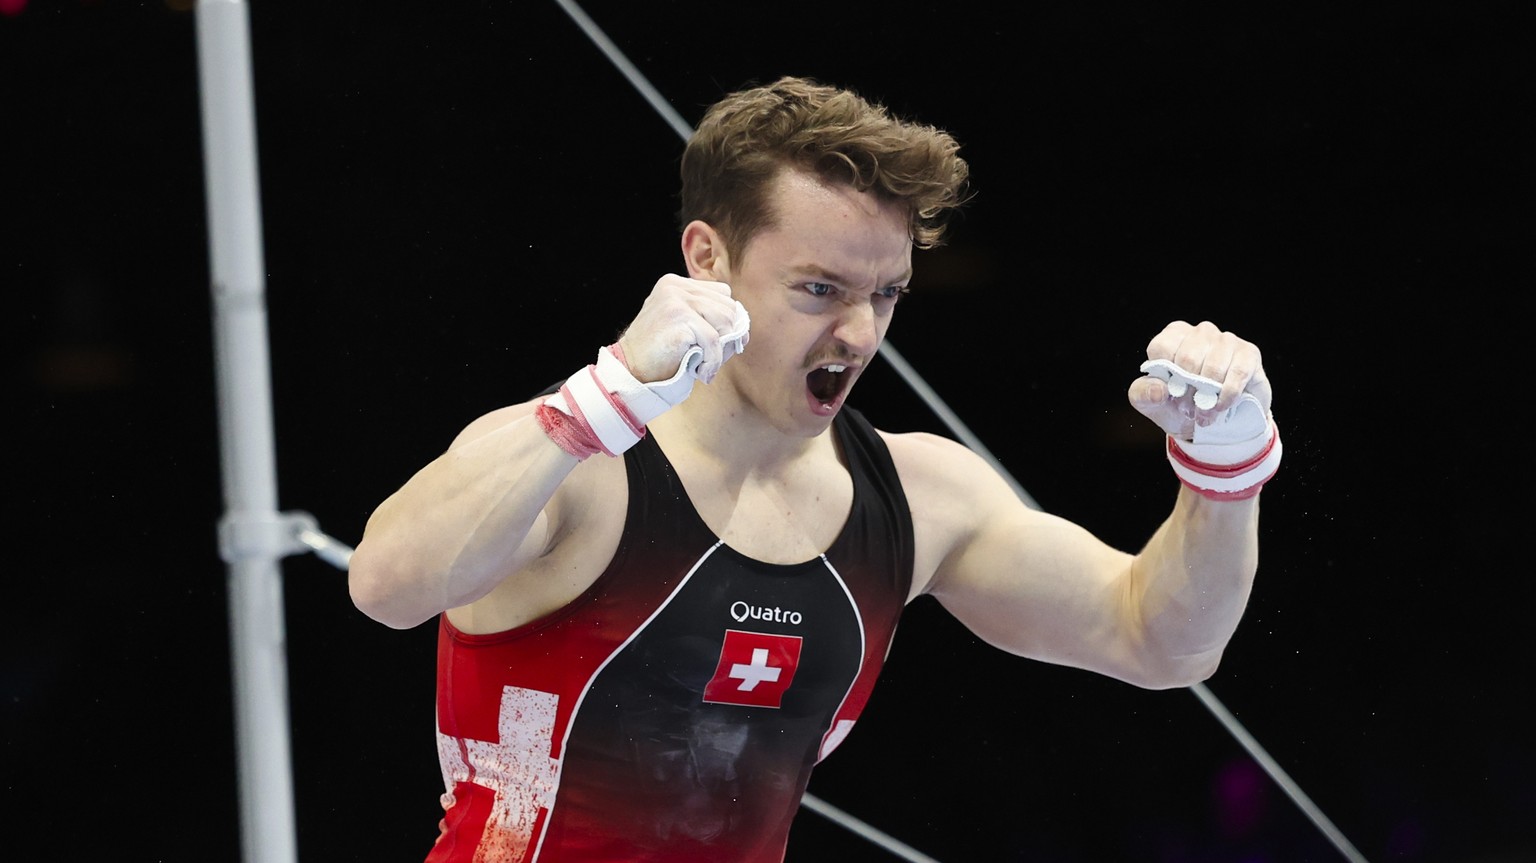 Switzerland&#039;s Christian Baumann gestures as he competes on the horizontal bar during the Men&#039;s team final at the Artistic Gymnastics World Championships in Antwerp, Belgium, Tuesday, Oct. 3, ...